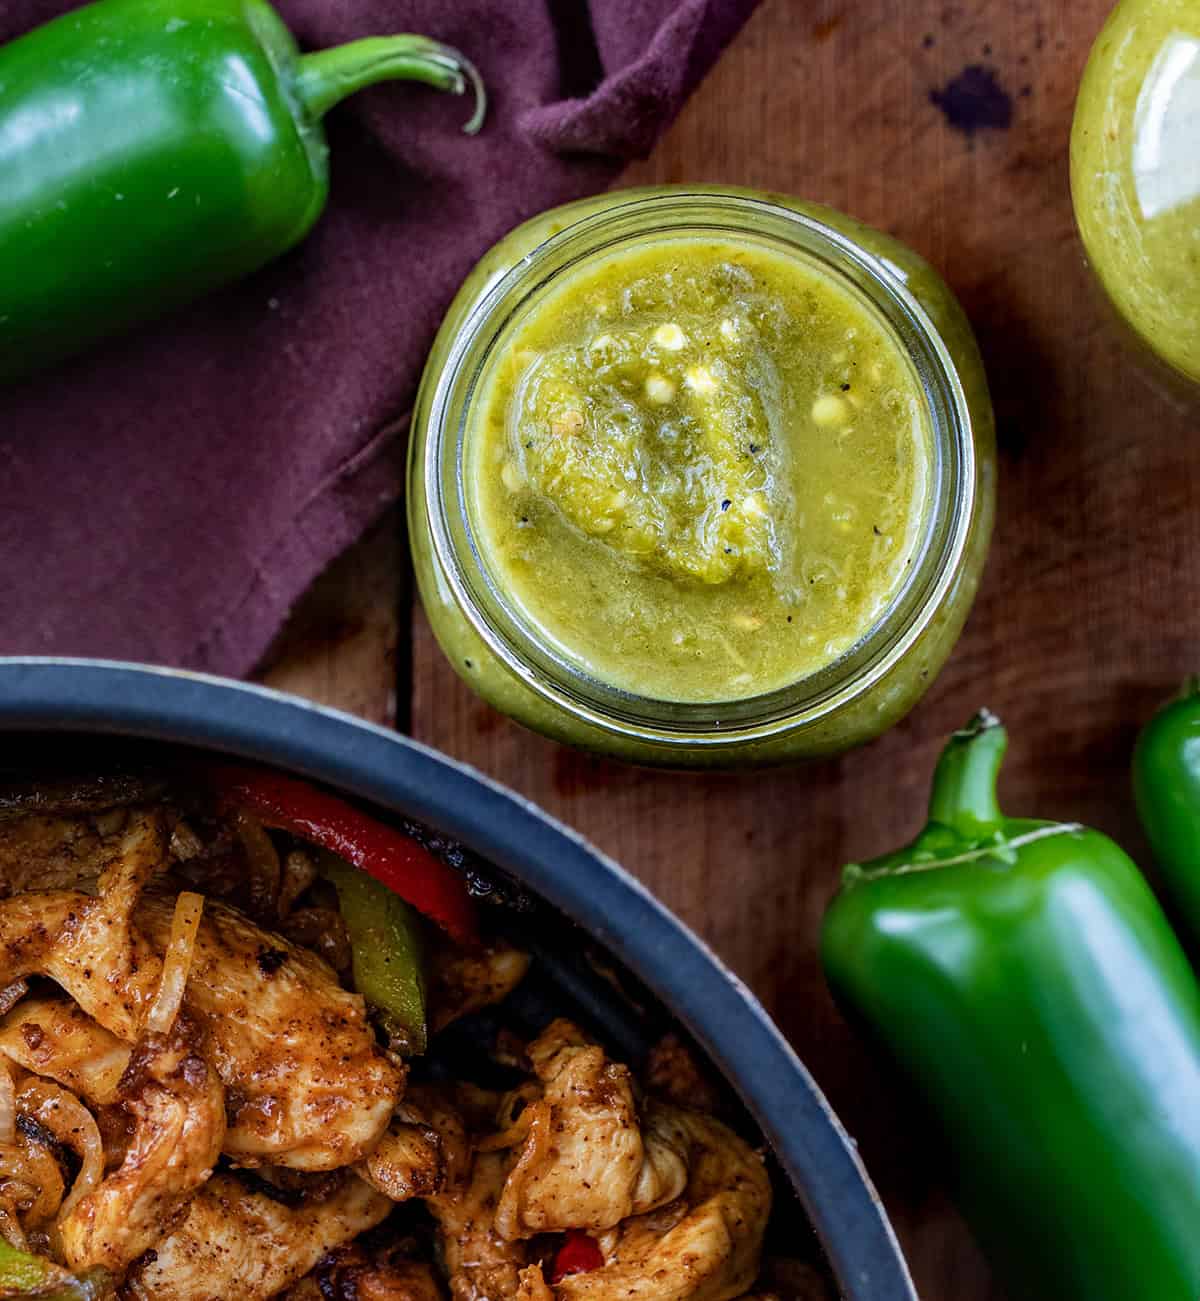 Jalapeno Hot Sauce in an open jar next to fajita chicken and jalapenos on a wooden table from overhead.